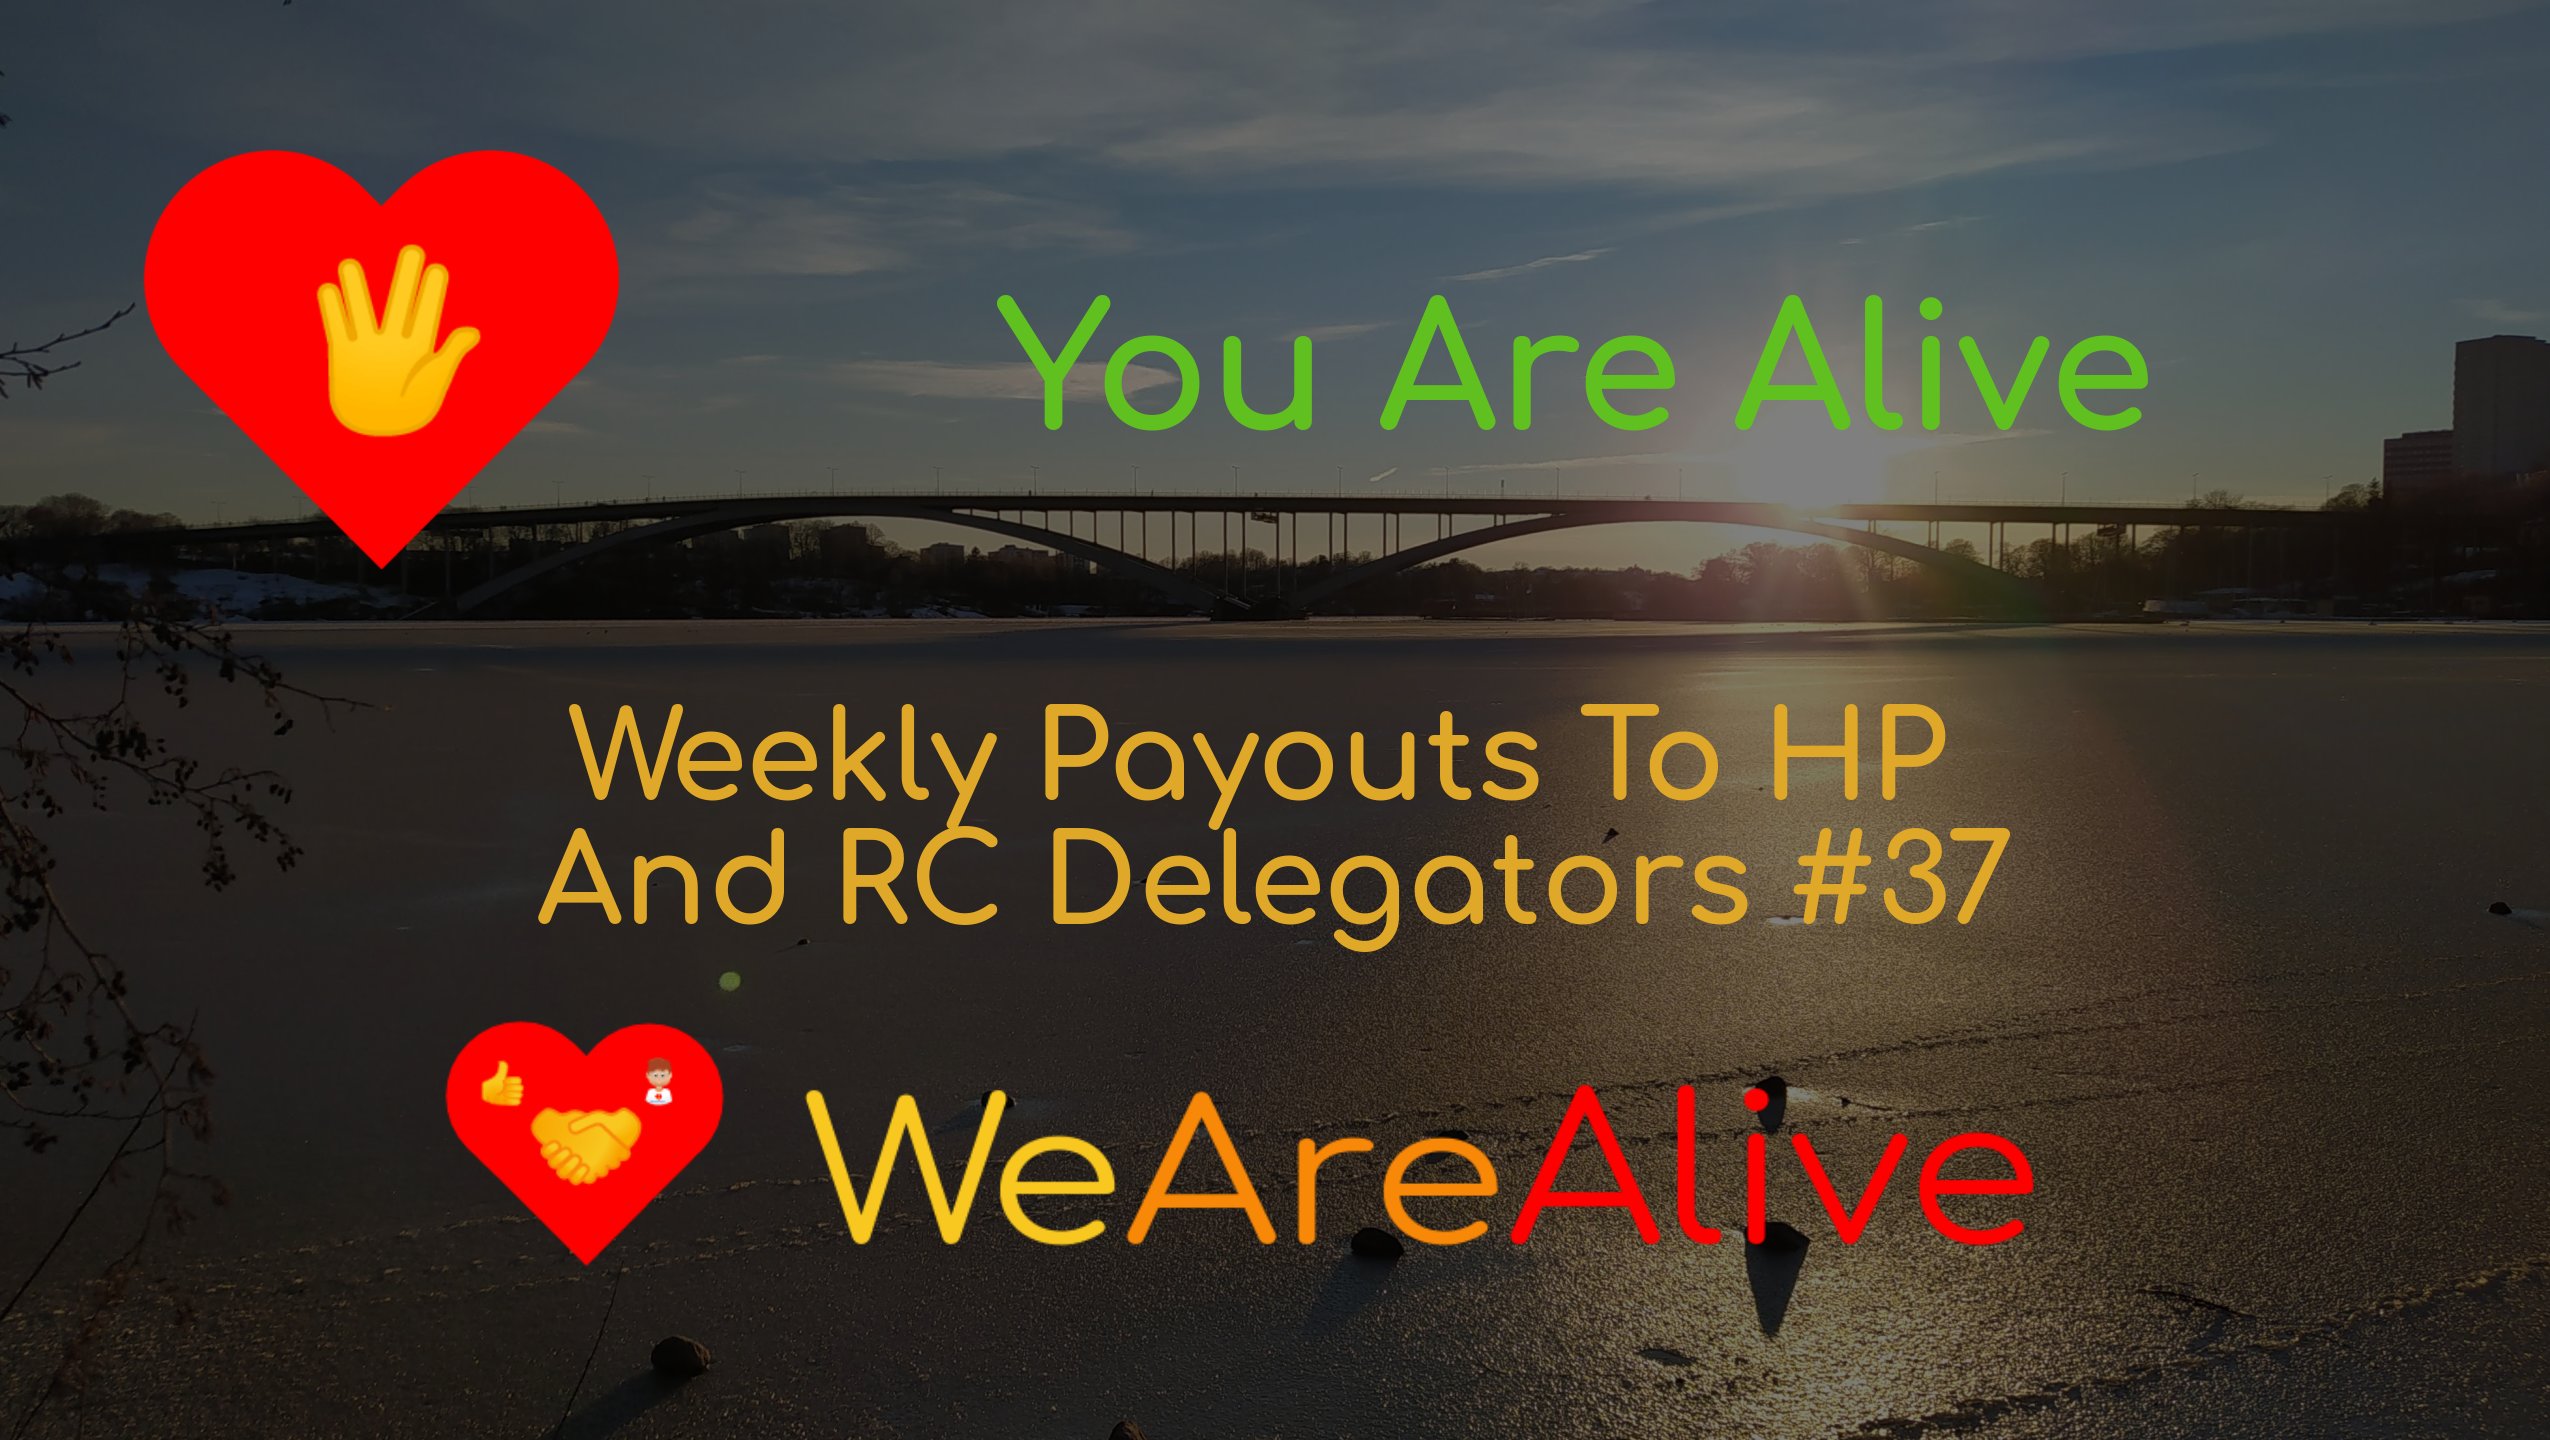 @youarealive/you-are-alive-weekly-payouts-to-hp-and-rc-delegators-37